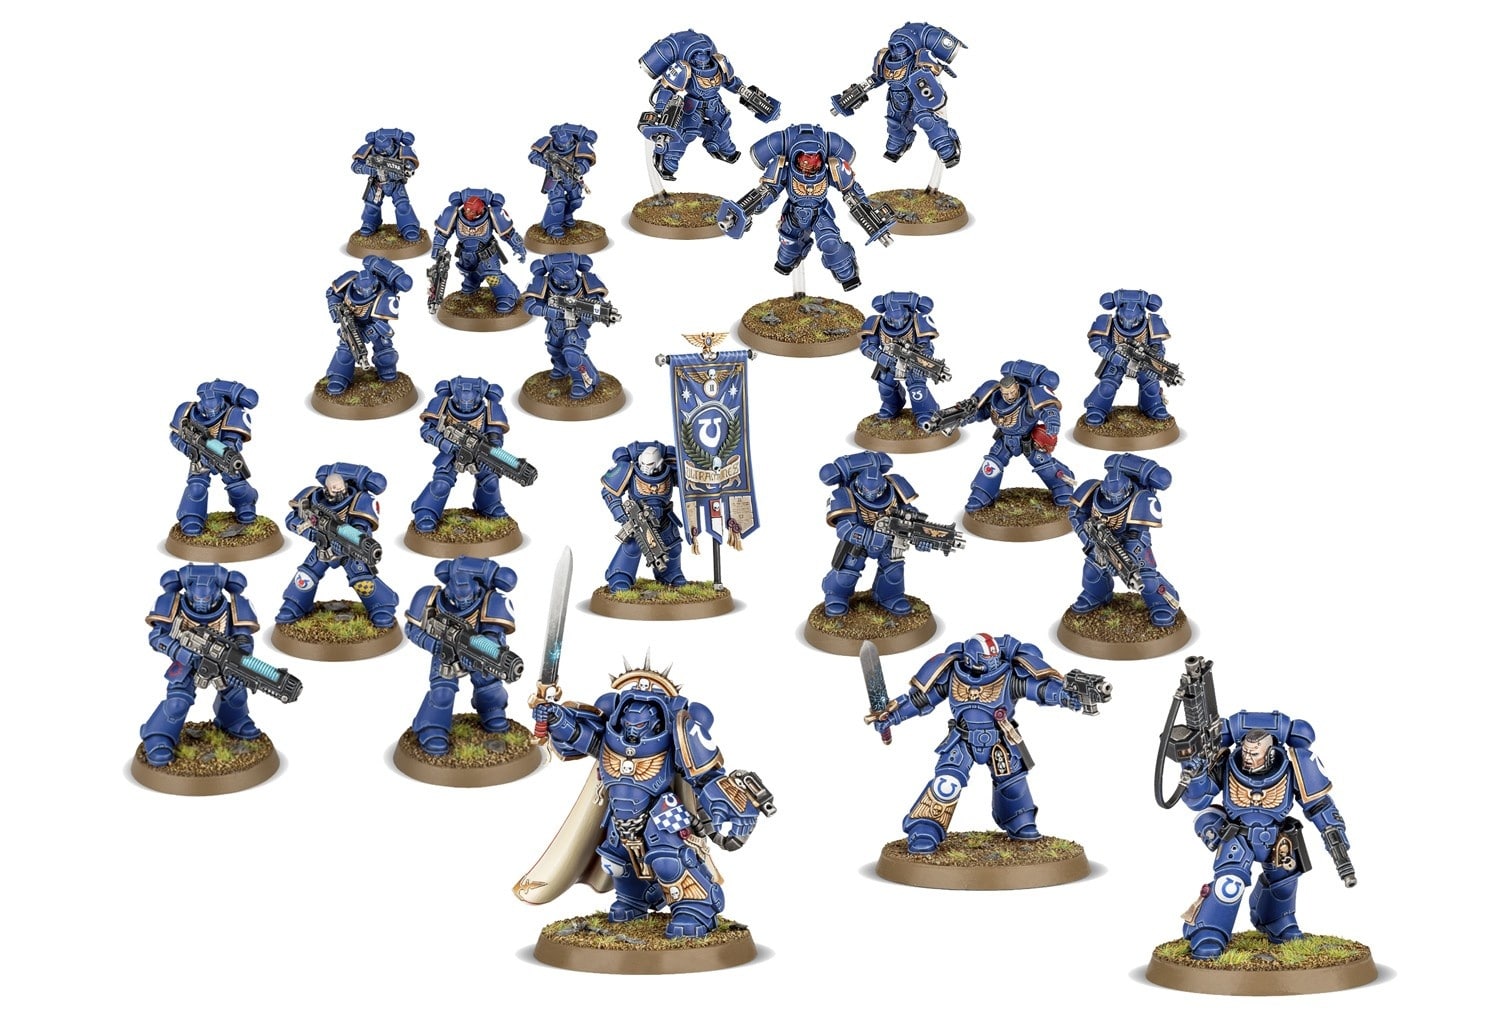 (It all started with miniatures: Easily recognisable by their blue armour, the Ultramarines are one of the most famous Space Marine orders)